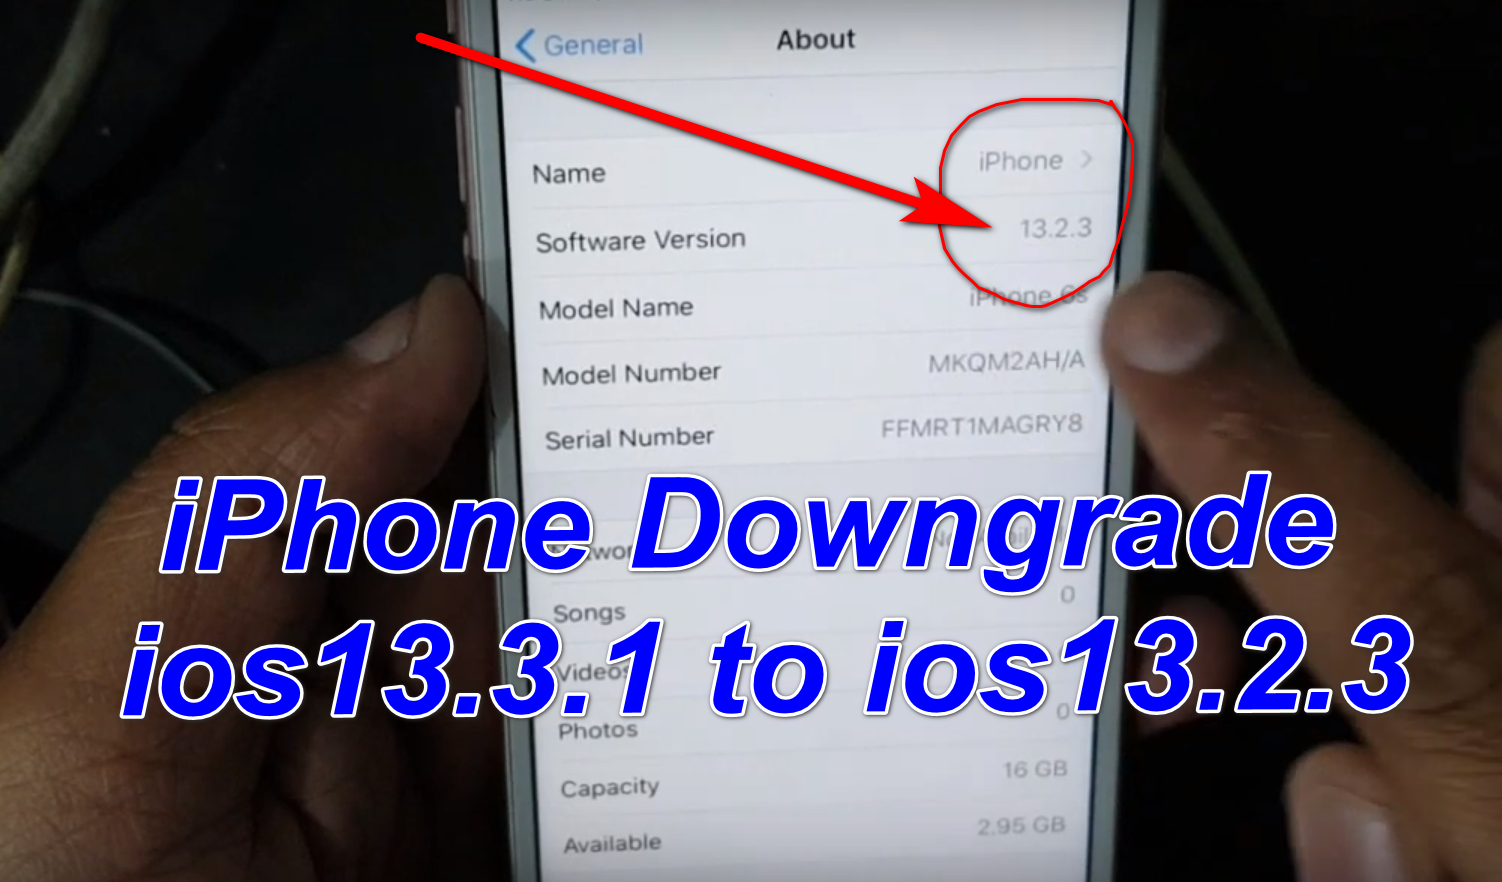 How To Downgread Iphone Ios 13 3 1 To Ios13 2 3 Icloud Activation Lock Phone Gsm Solution Com About Mobile Reparing Hardware And Software